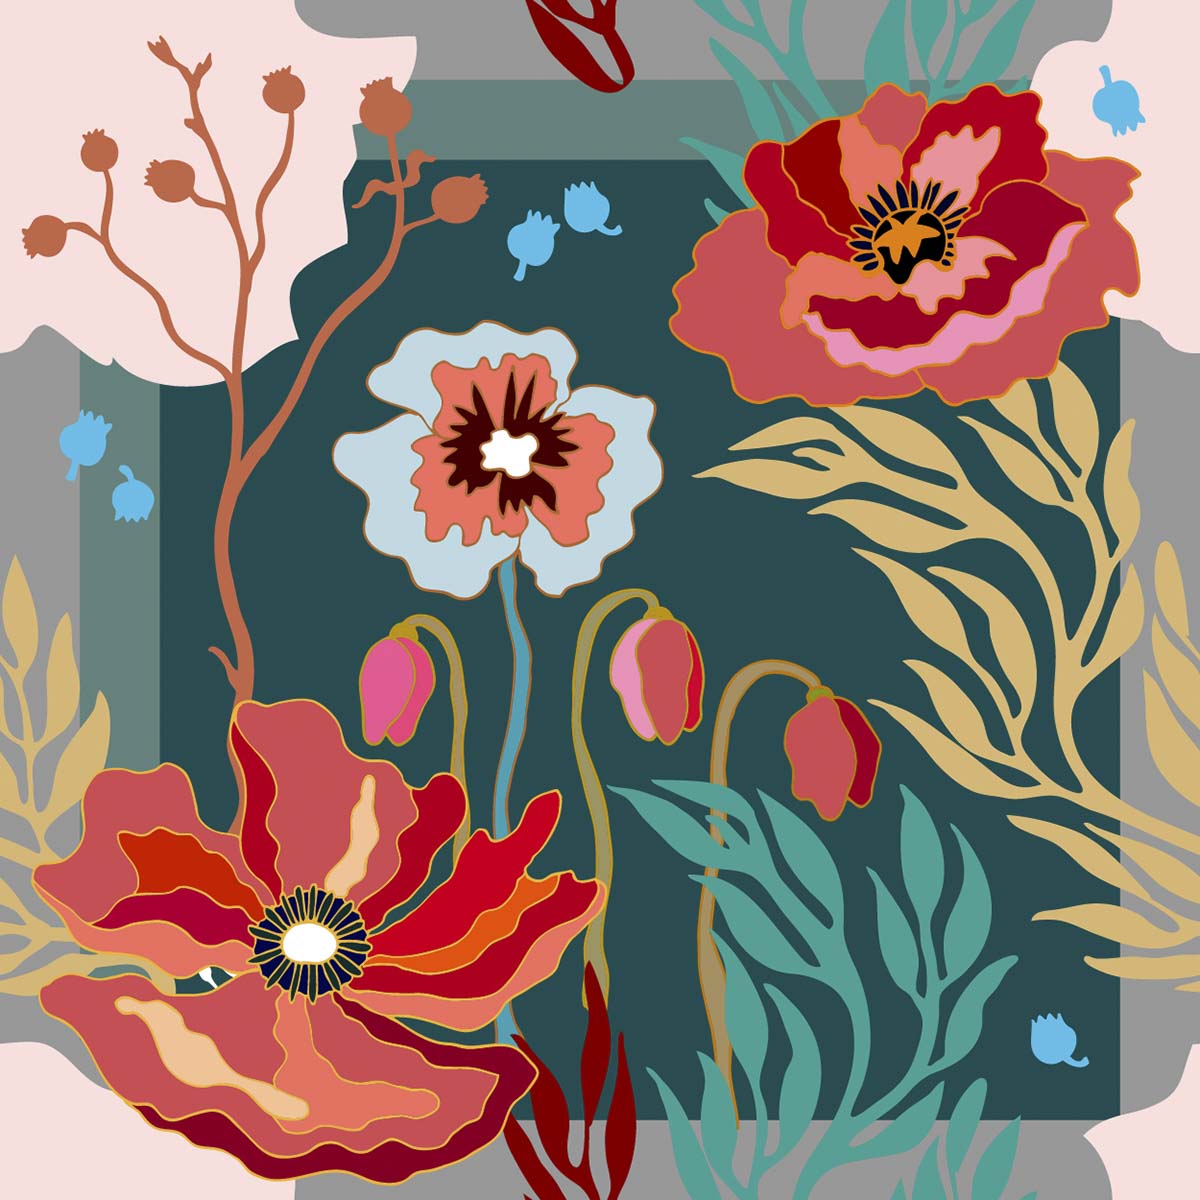 A colorful floral design on a square